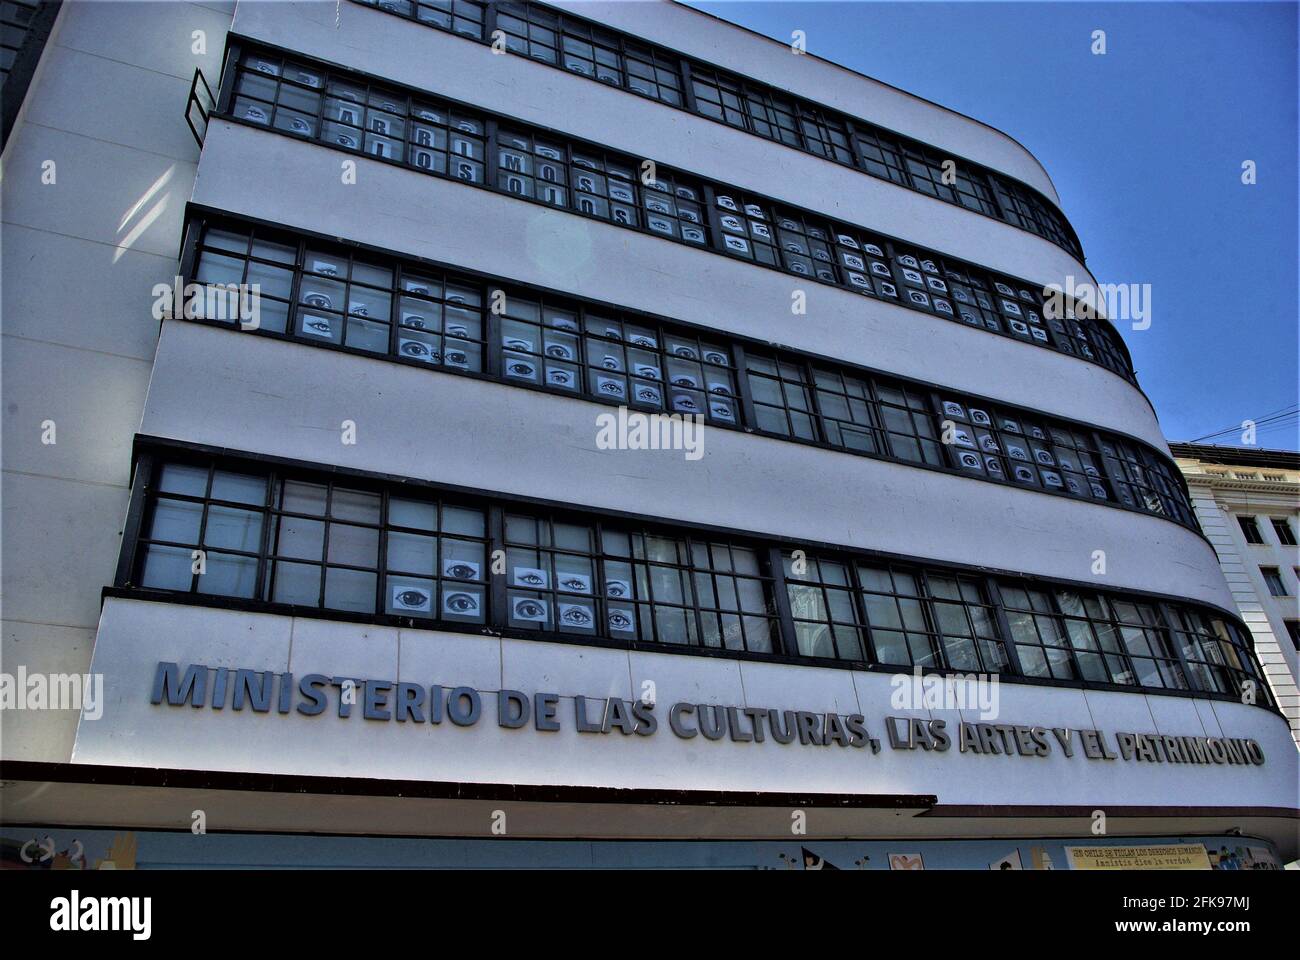 Protest posters in the windows of Ministry of Culture,highlighting protesters eye injuries in street demonstrations,Plaza Sotomayor,Valparaiso,Chile Stock Photo